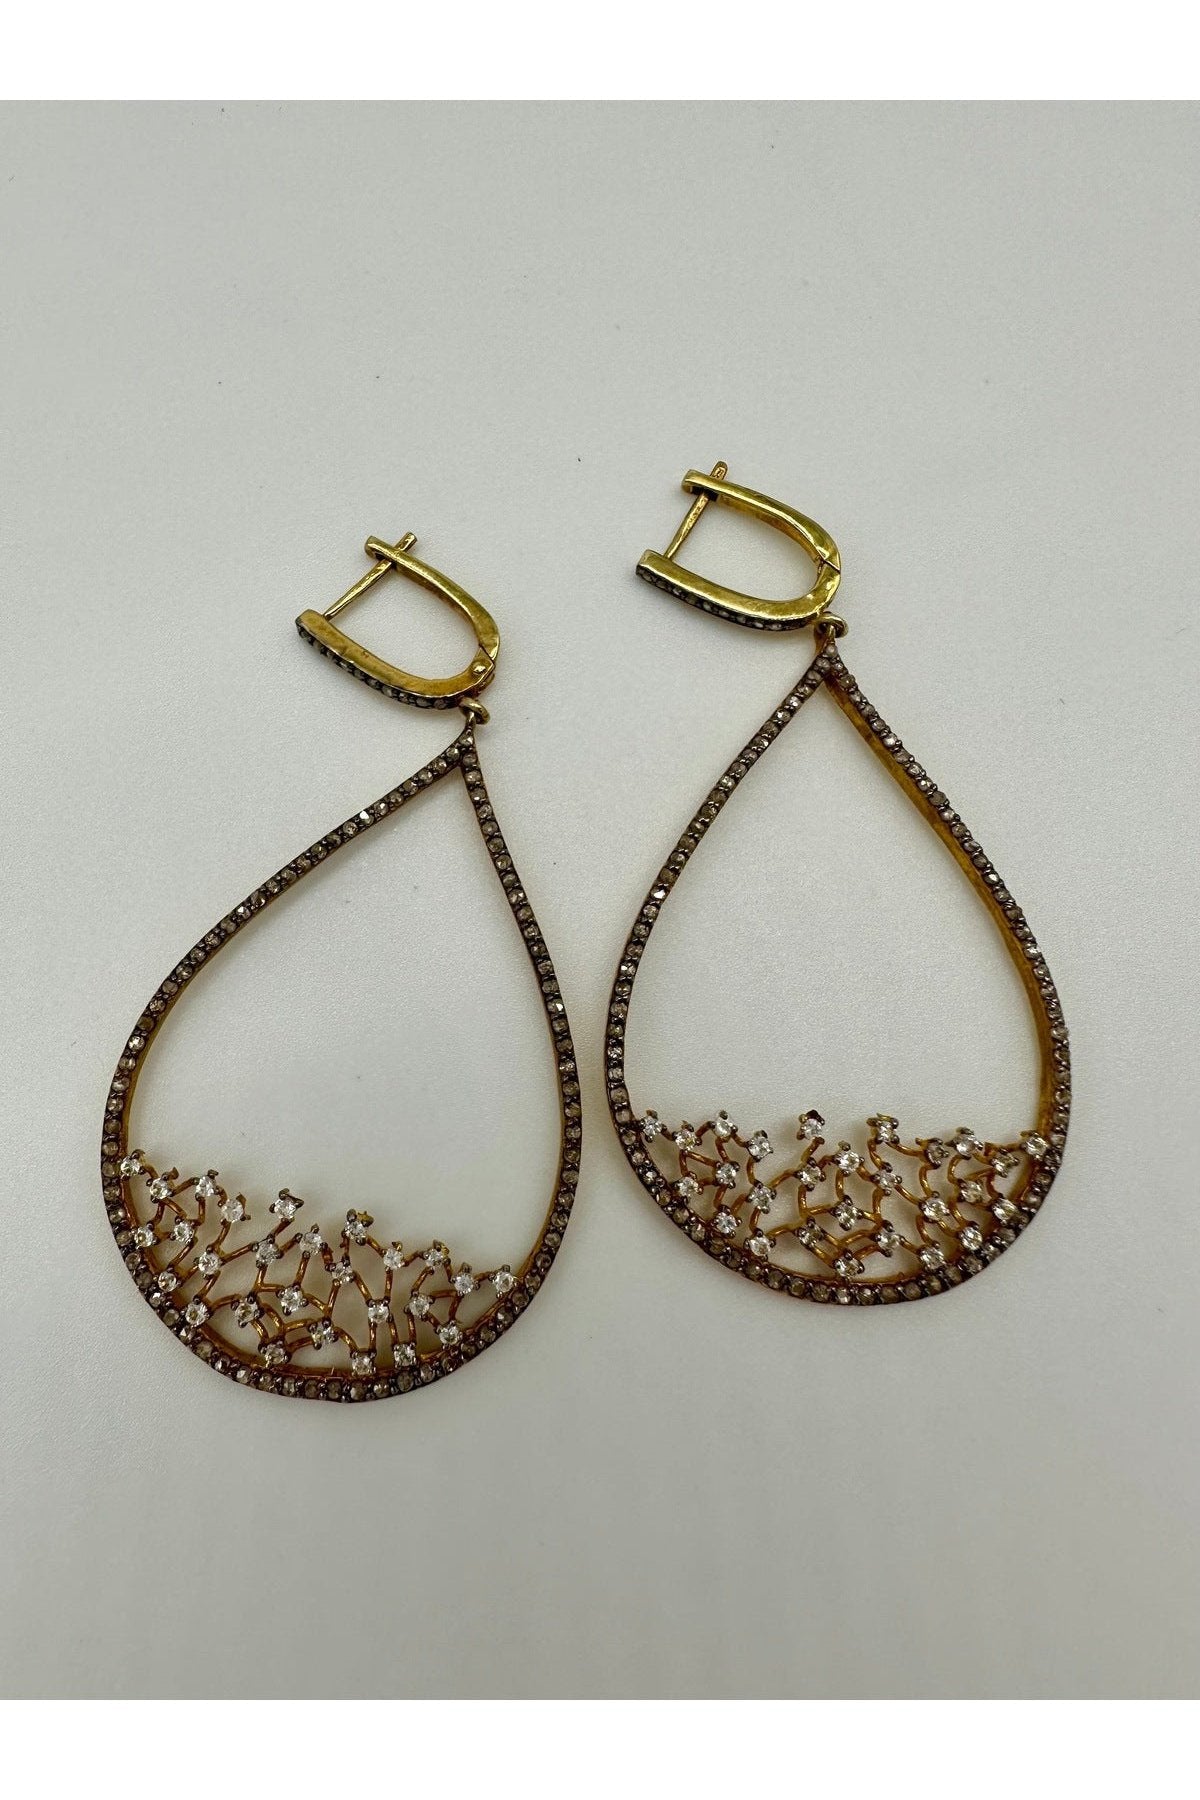 Evergreen Collections Two Tone Teardrop Earrings